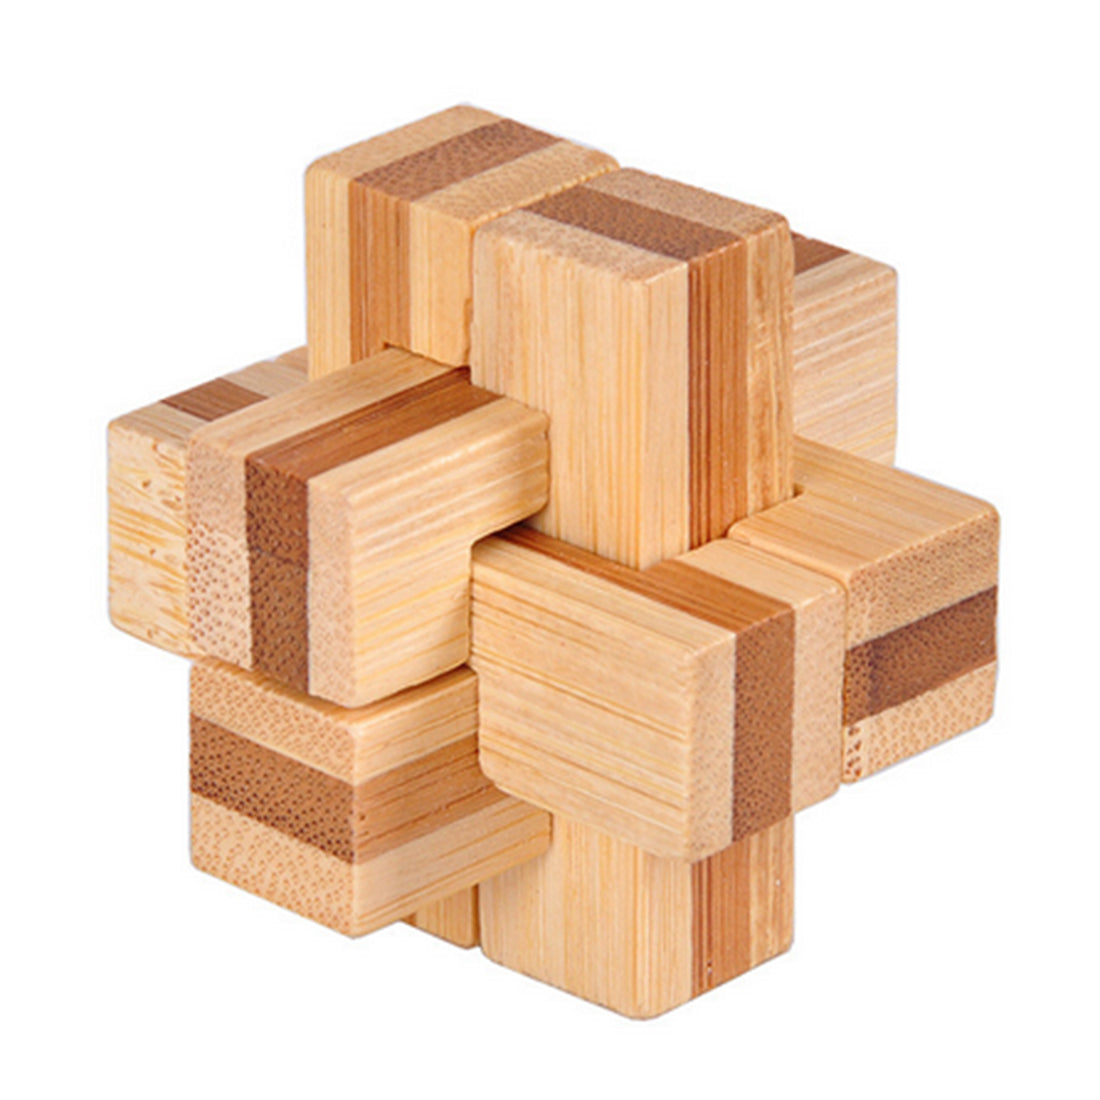 Bamboo Six-port Shape Kong Ming Lock Puzzle Toy for Kids Children Learning Educational Toys